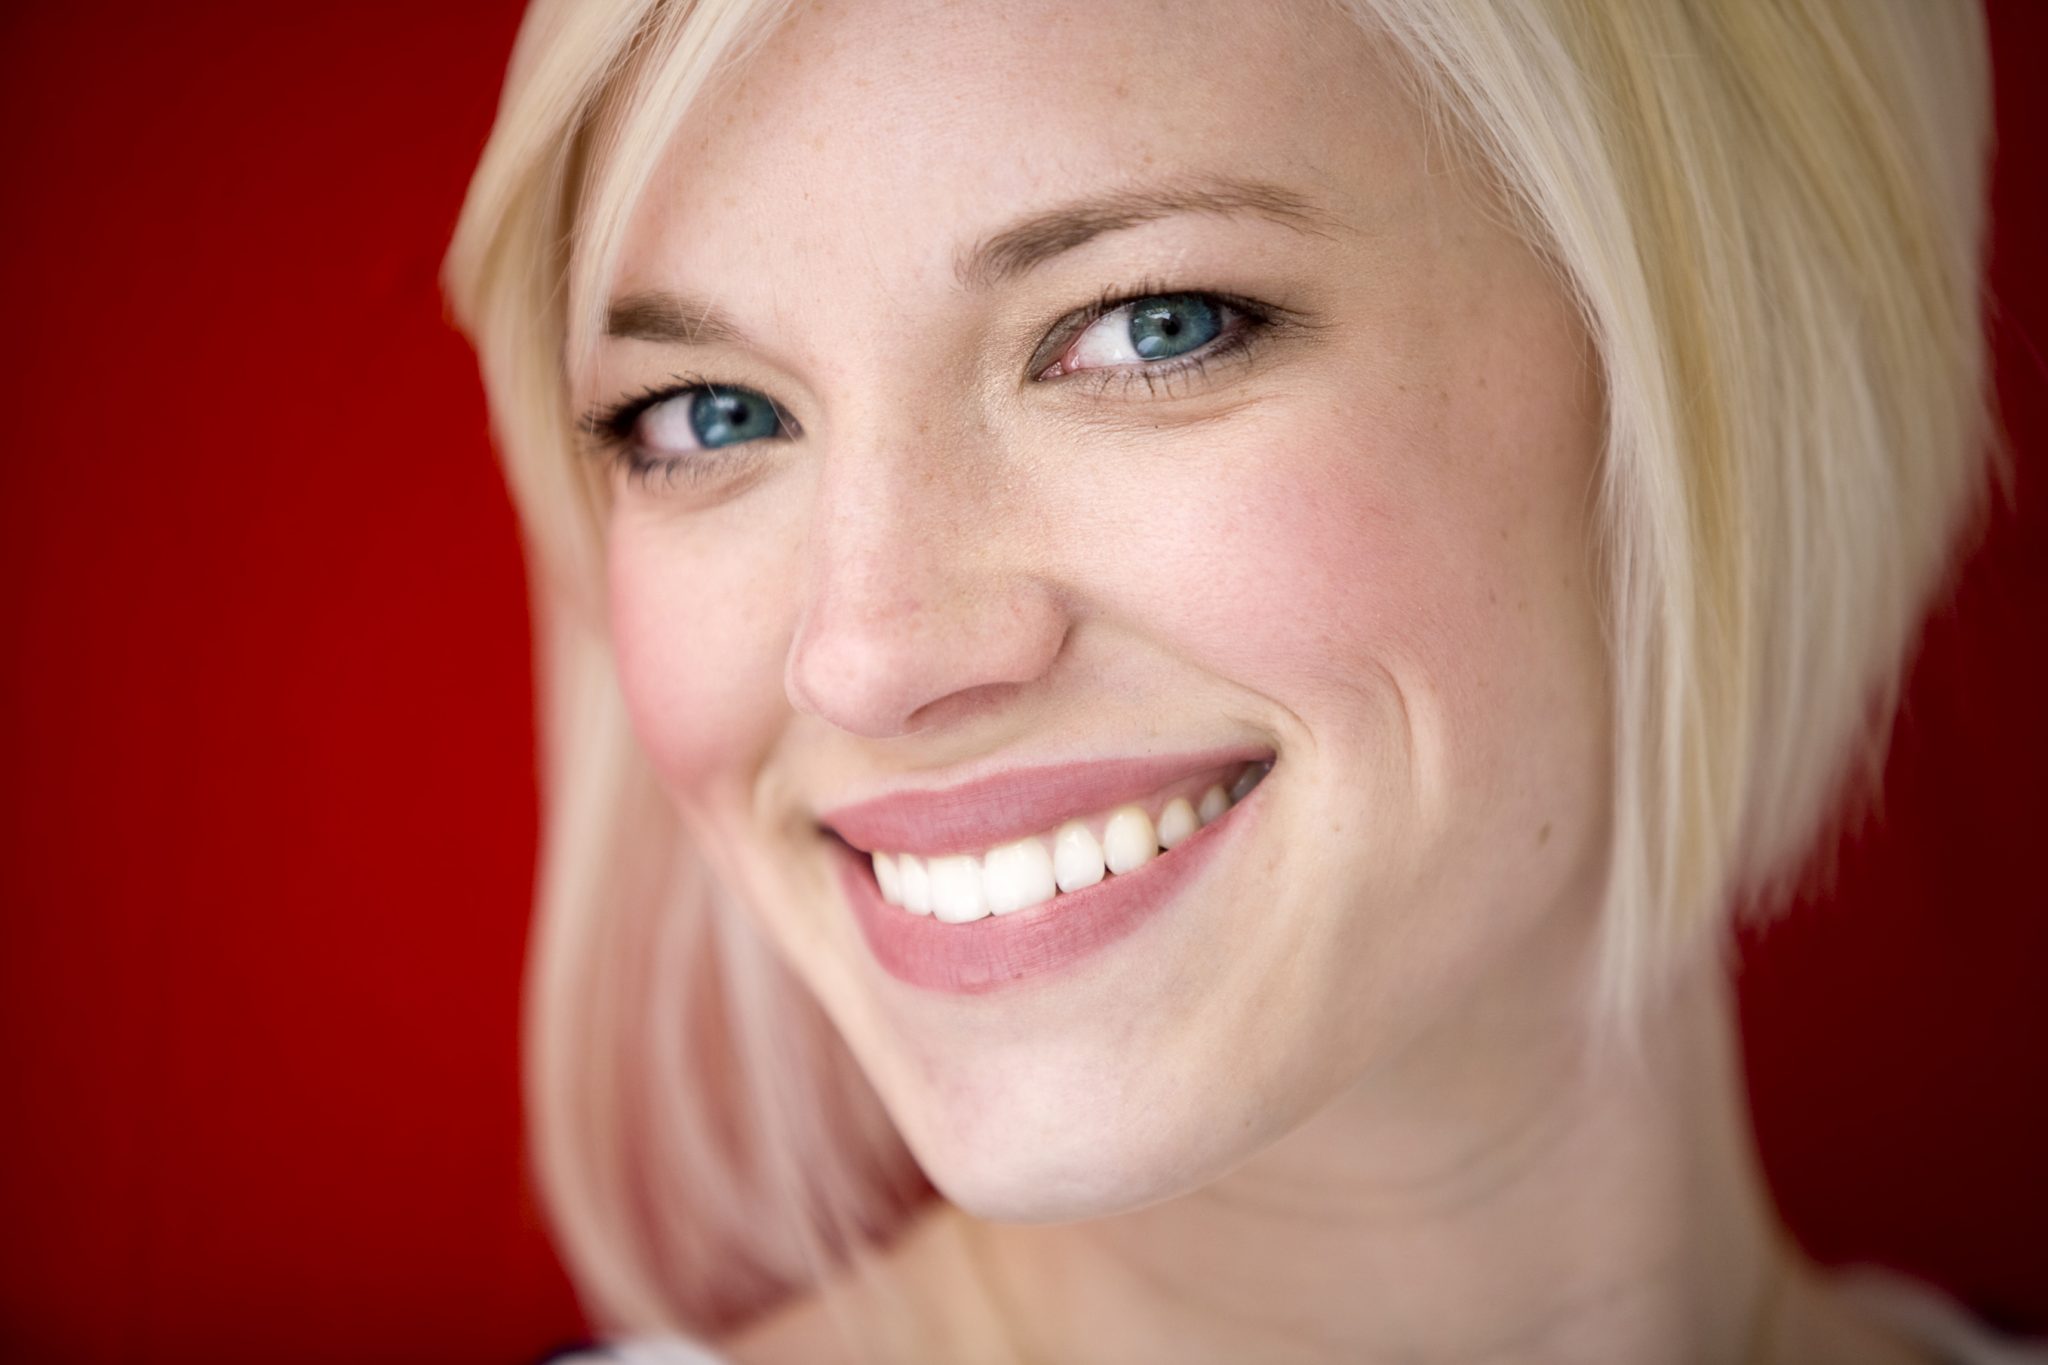 Blonde woman against red background after minor tooth extractions.